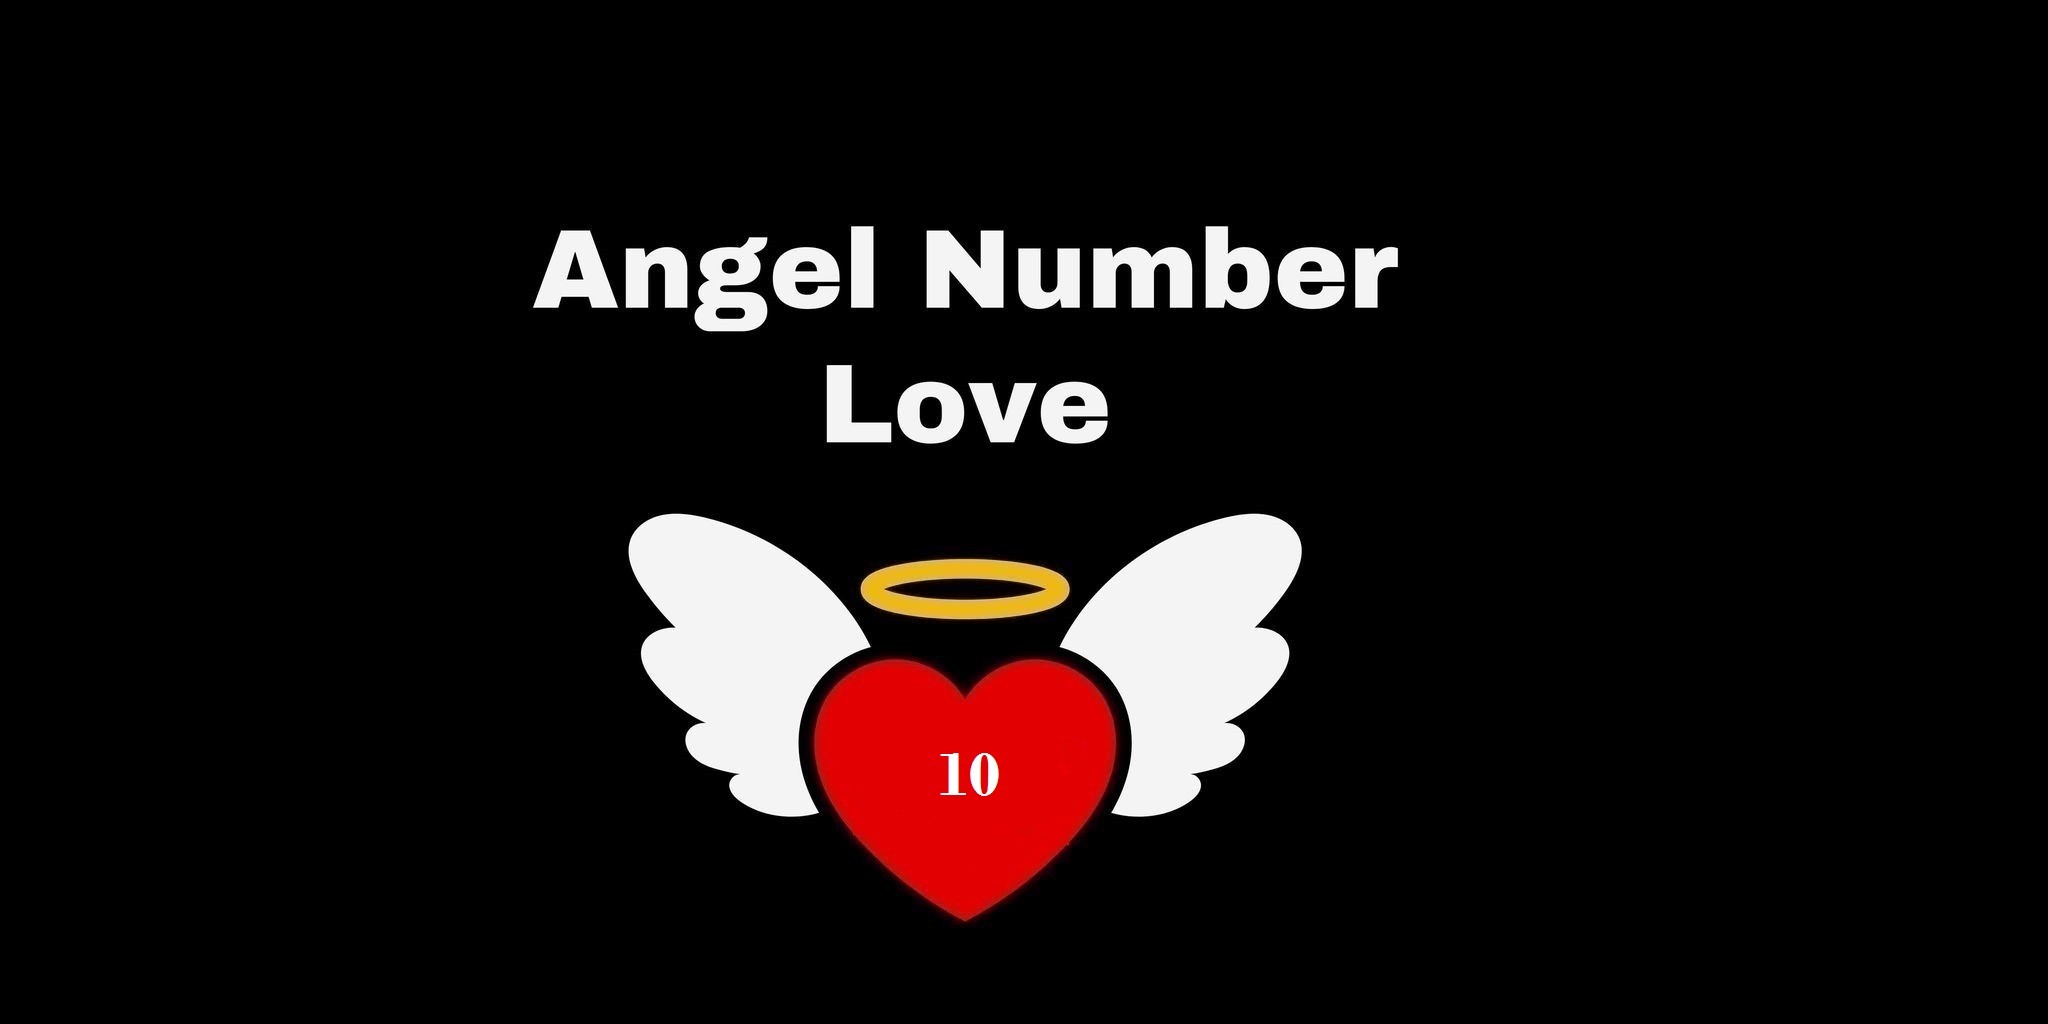 10 Angel Number Meaning In Love